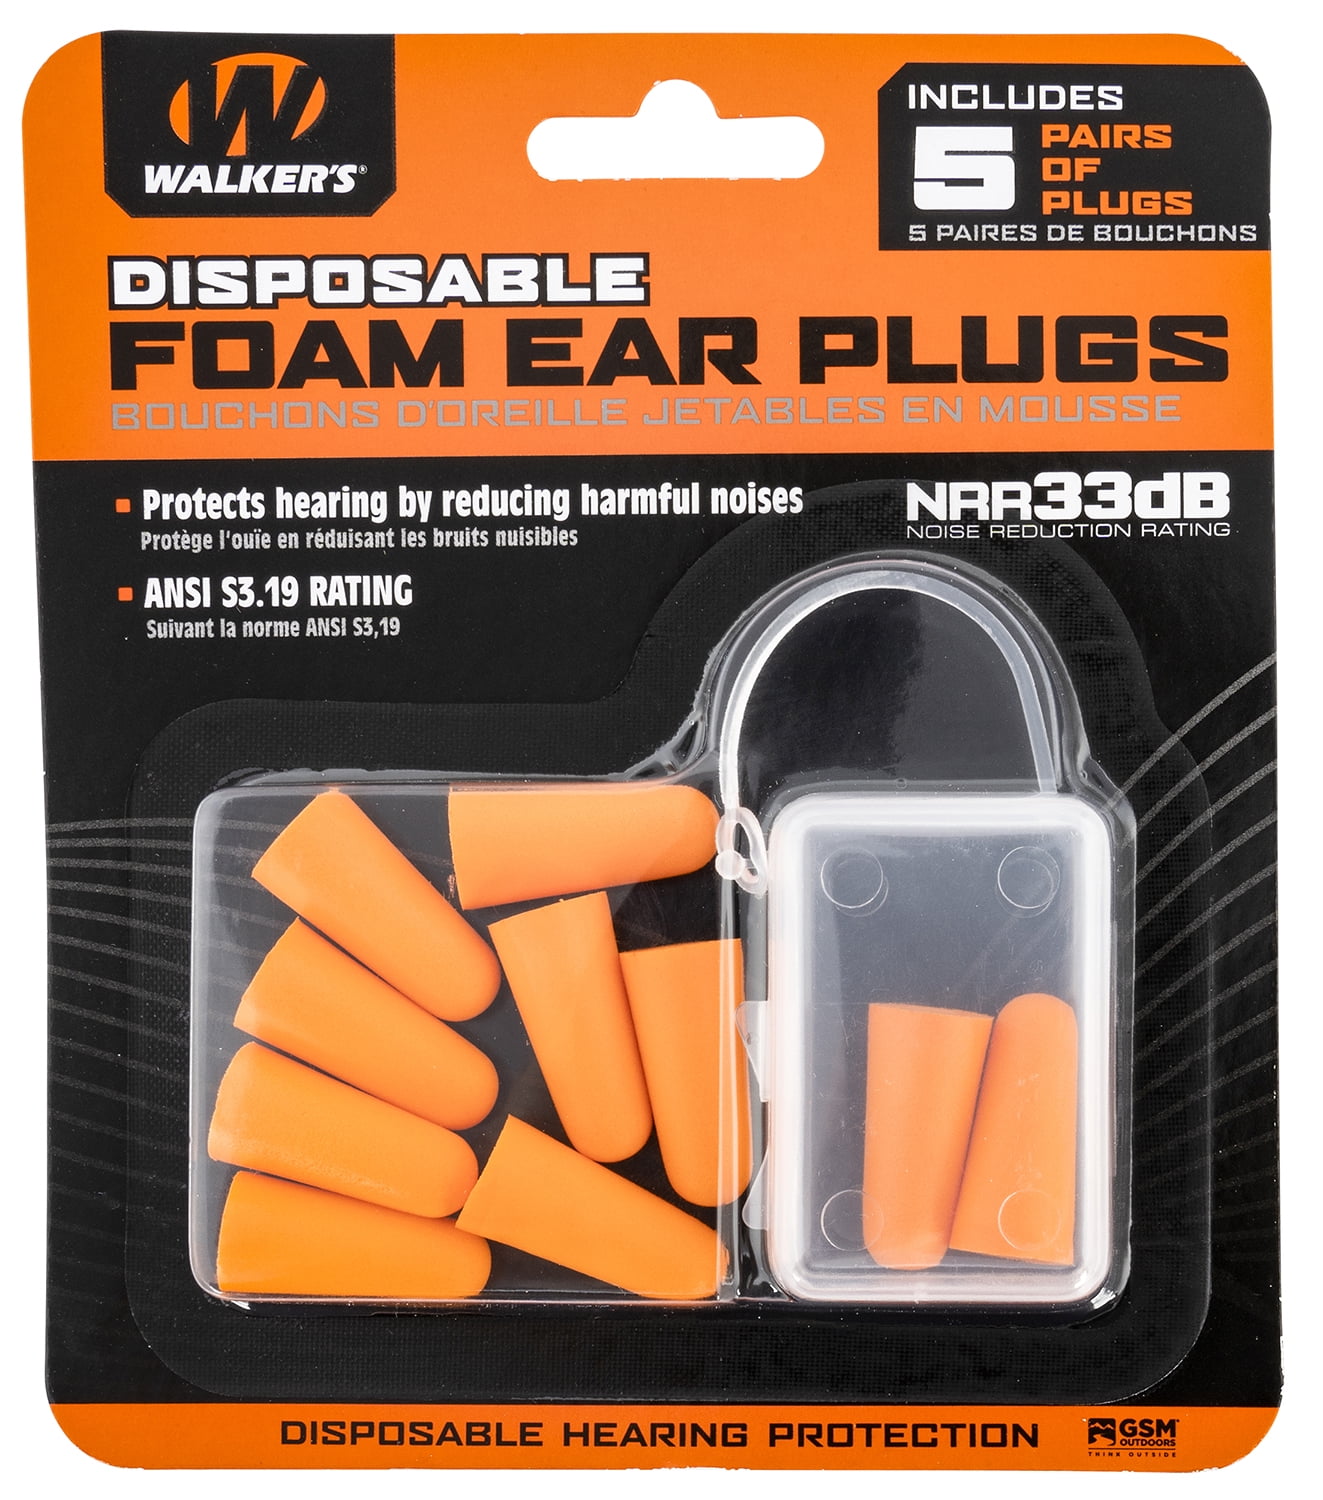 Loop Quiet Ear Plugs for Noise Reduction â€“ Super Soft, Reusable Hearing  Protection in Flexible Silicone for Sleep, Noise Sensitivity & Flights - 8  Ear Tips in XS/S/M/L â€“ 27dB Noise Cance 